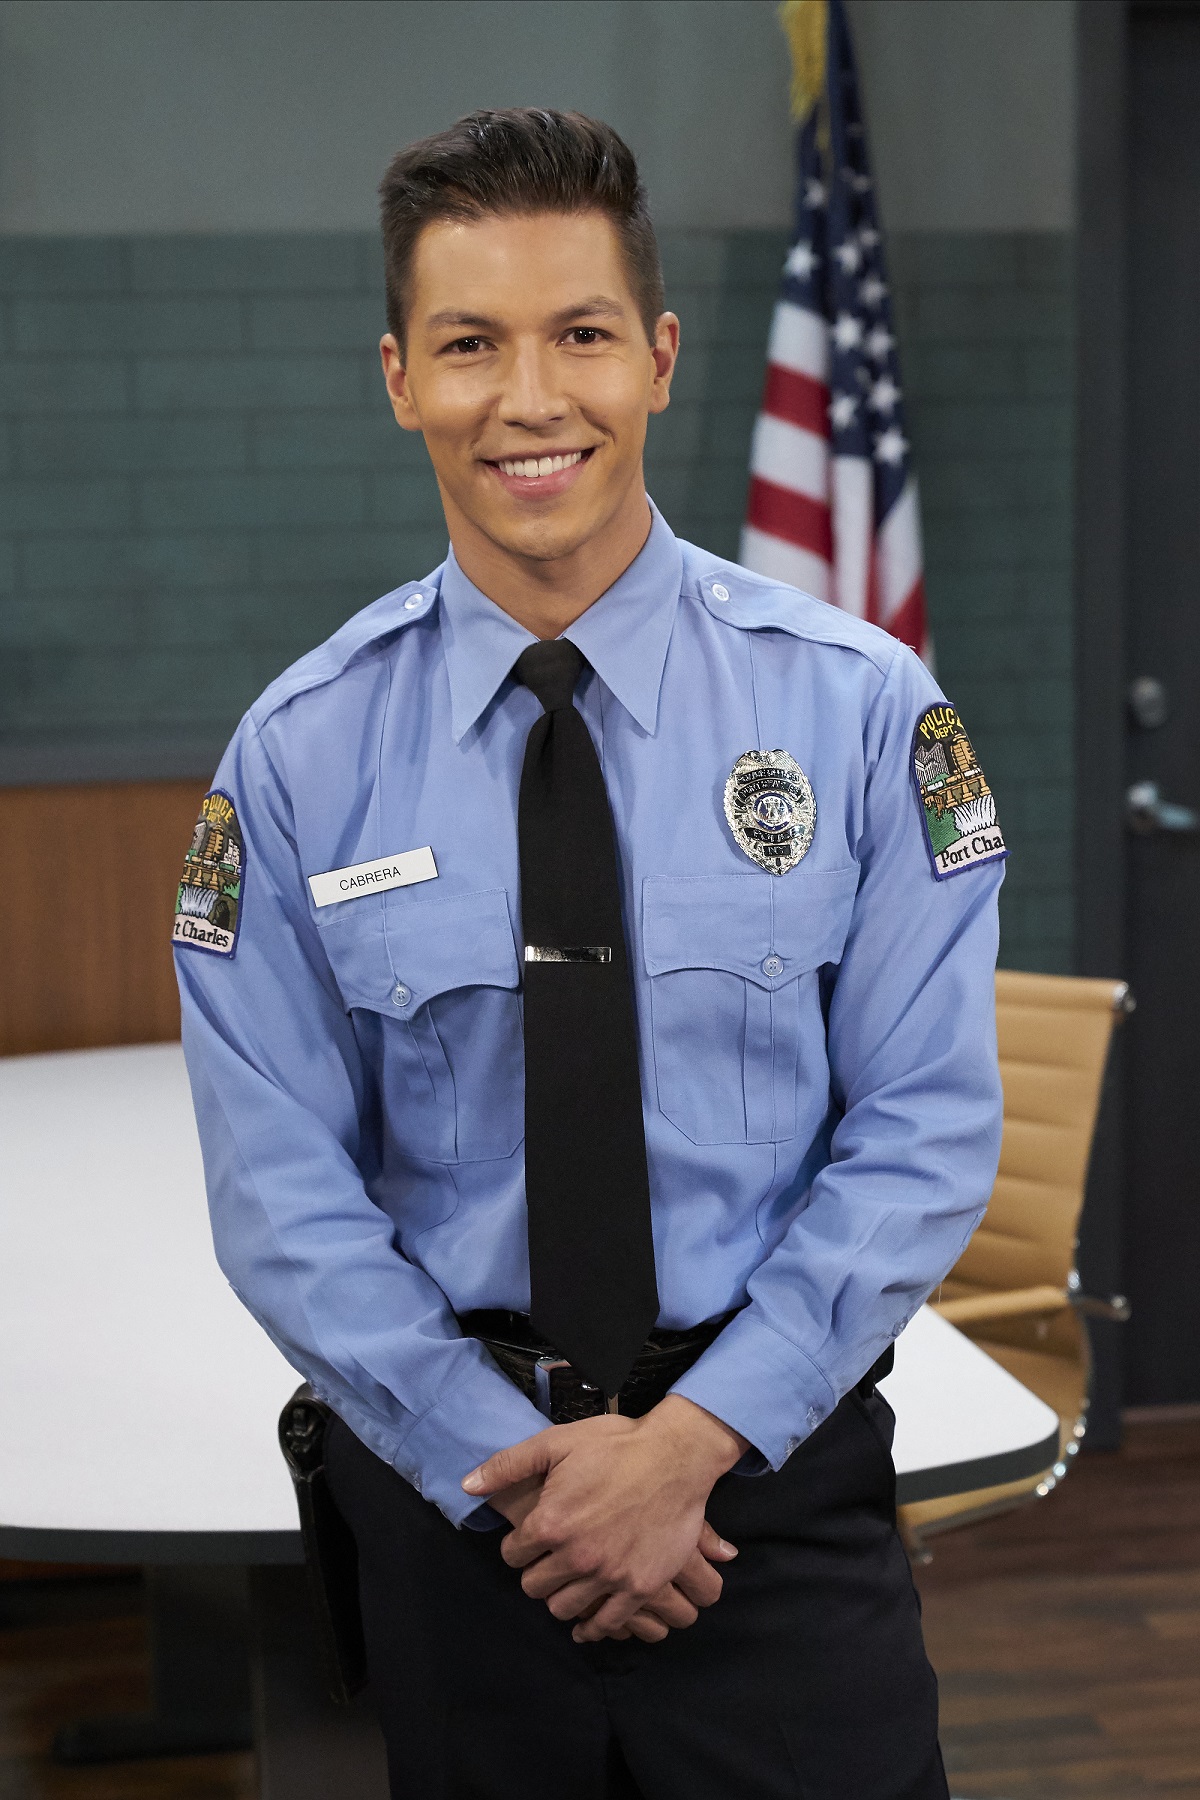 'General Hospital' actor Michael Blake Kruse wearing a police officer's uniform while onset of the soap opera.